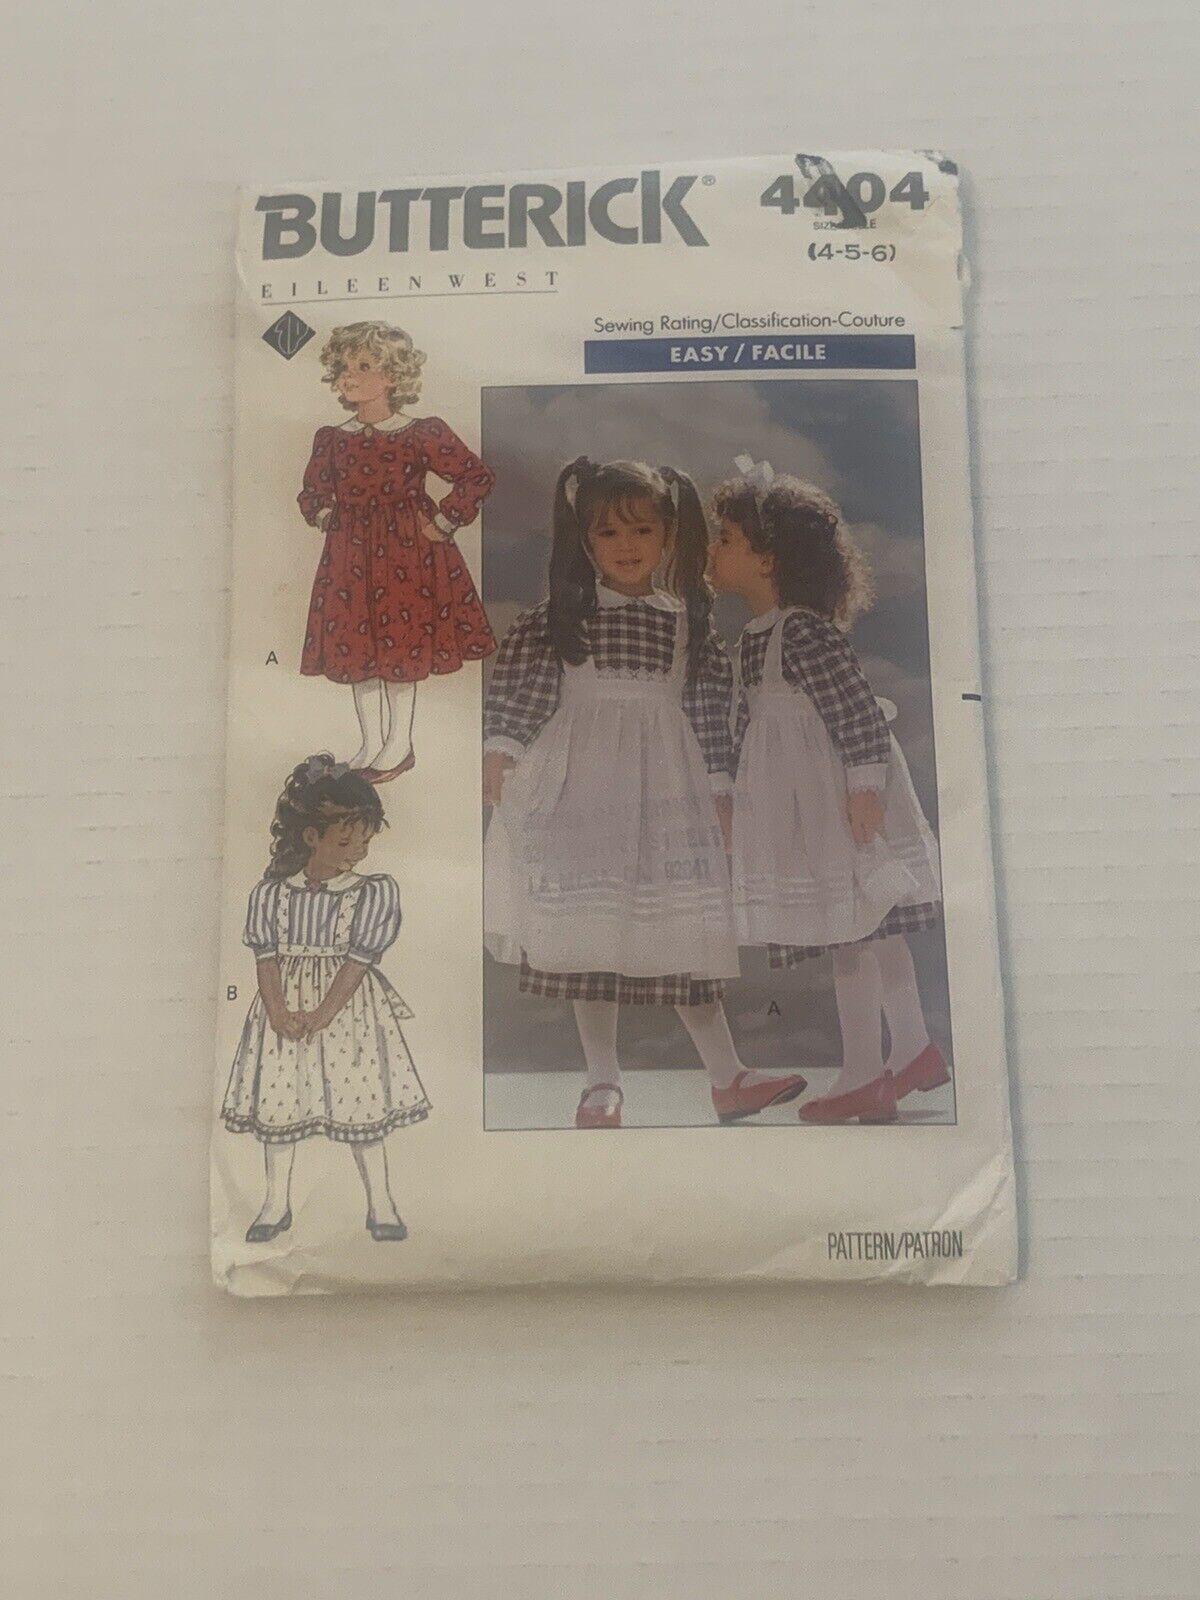 Vintage 1989 Butterick 4404 Sewing Pattern Toddlers’ Children’s Dress Size 4-6